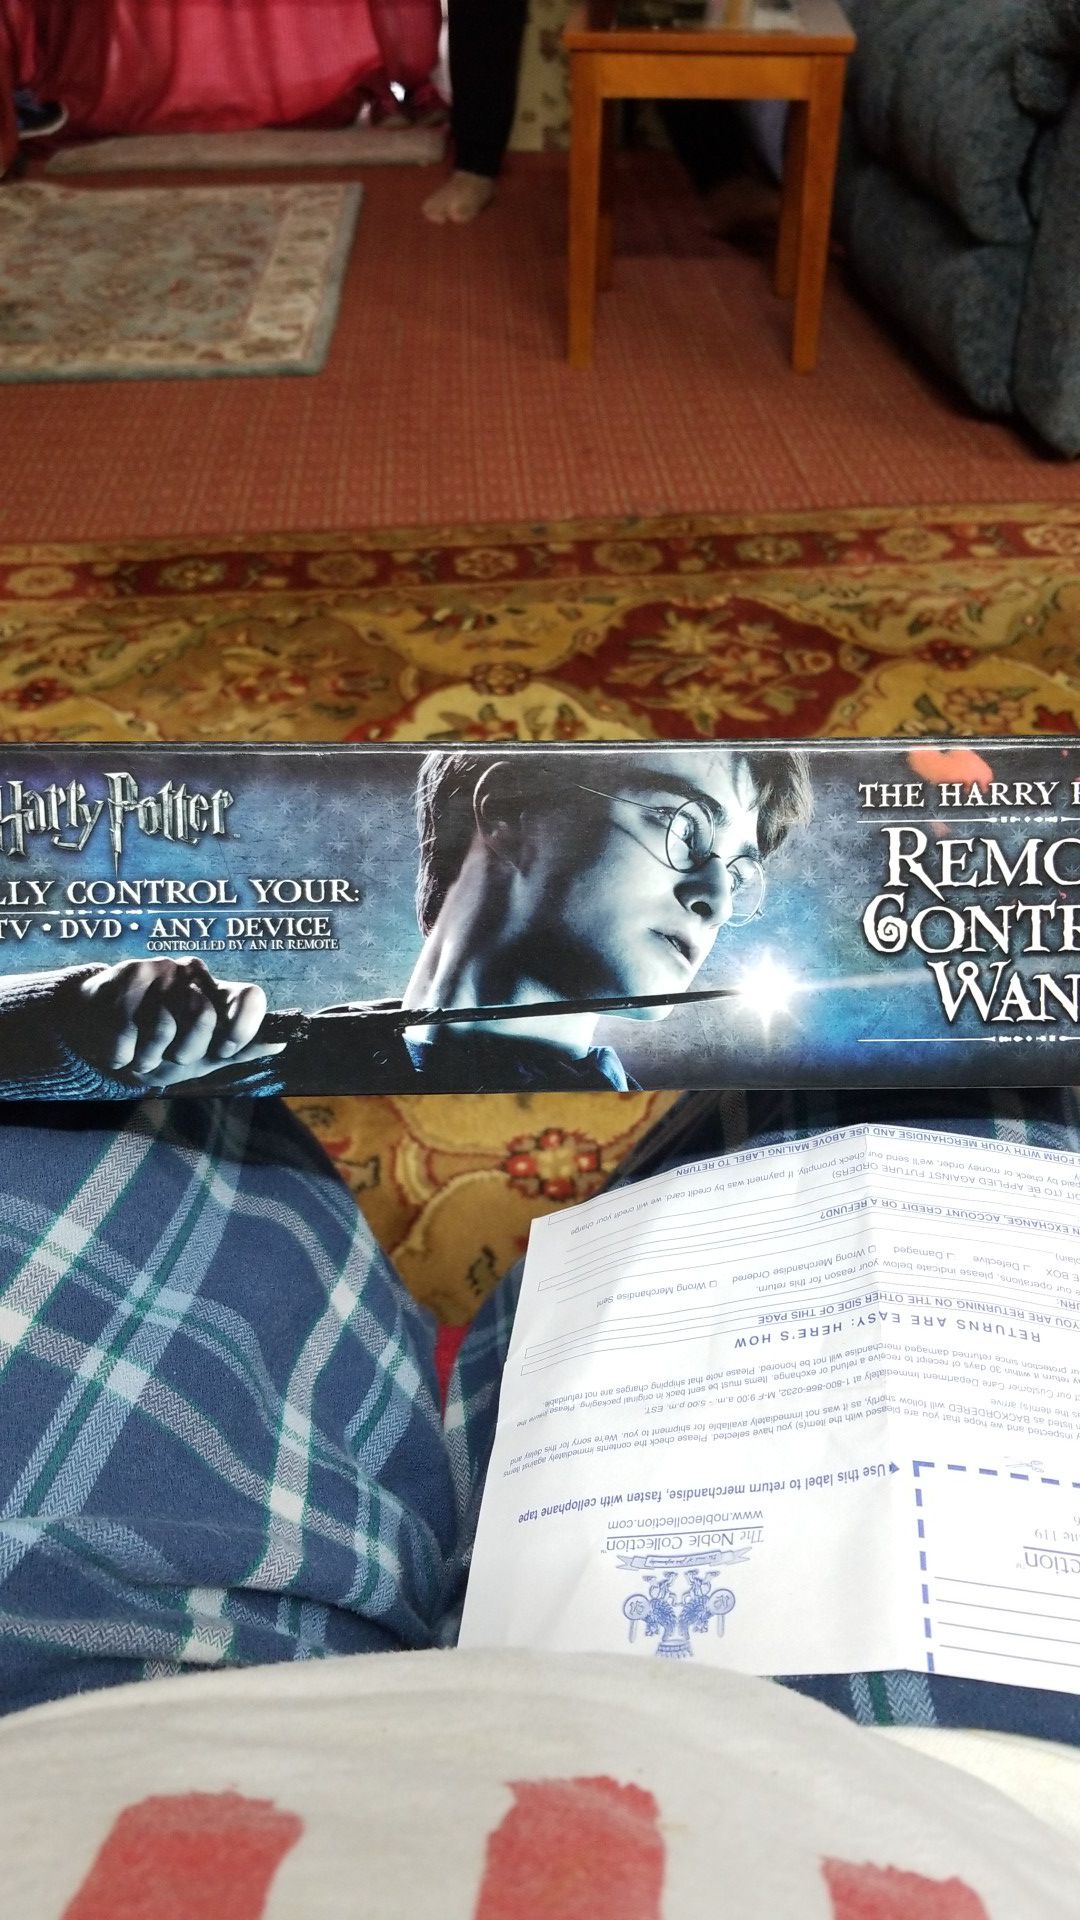 Harry Potter remote control wand